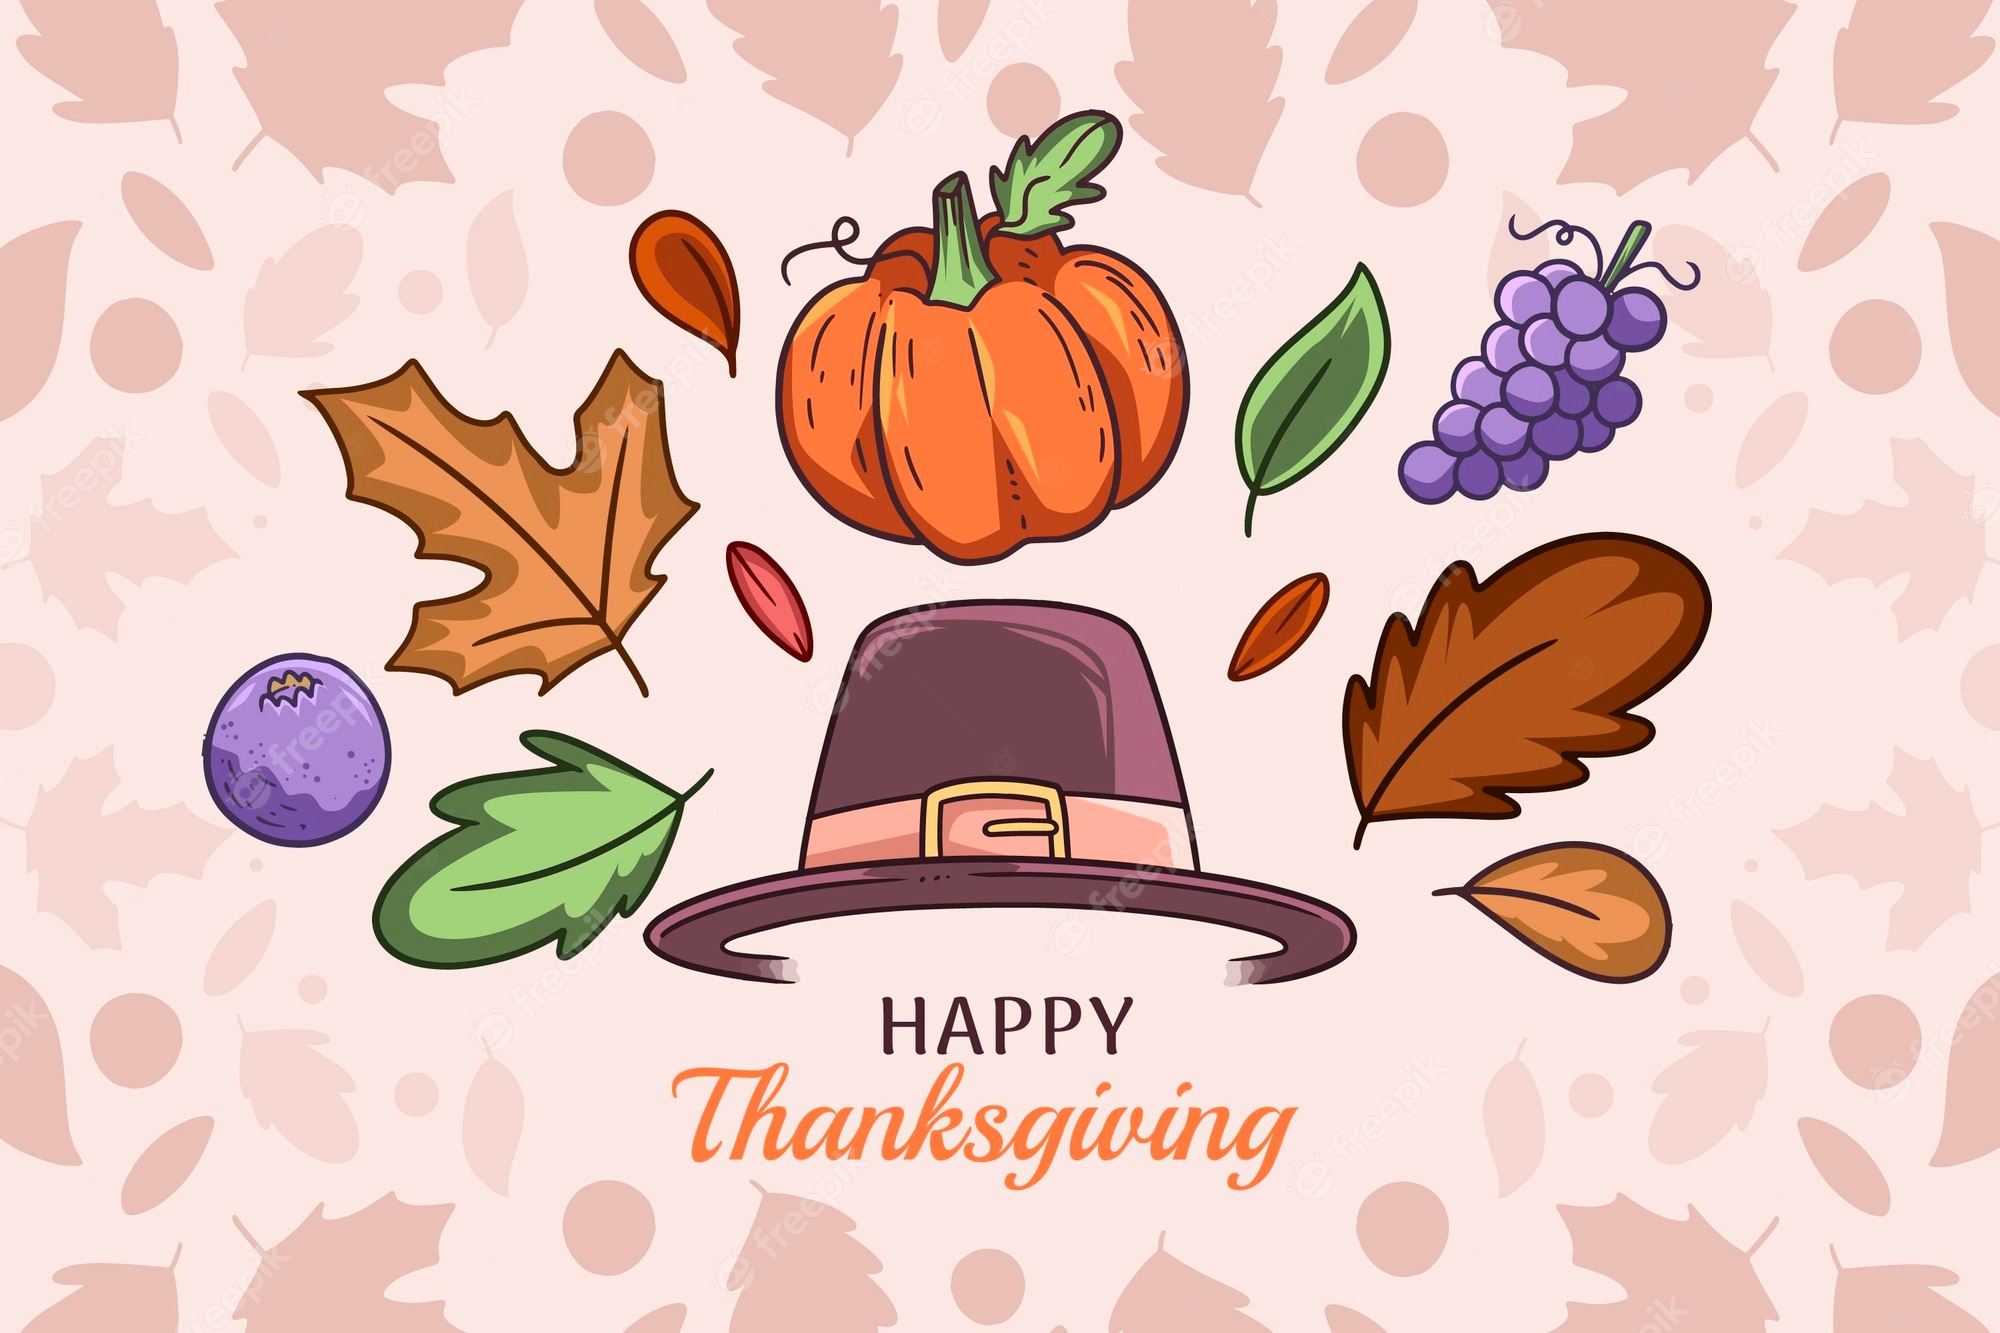 Free Vector. Hand drawn thanksgiving background